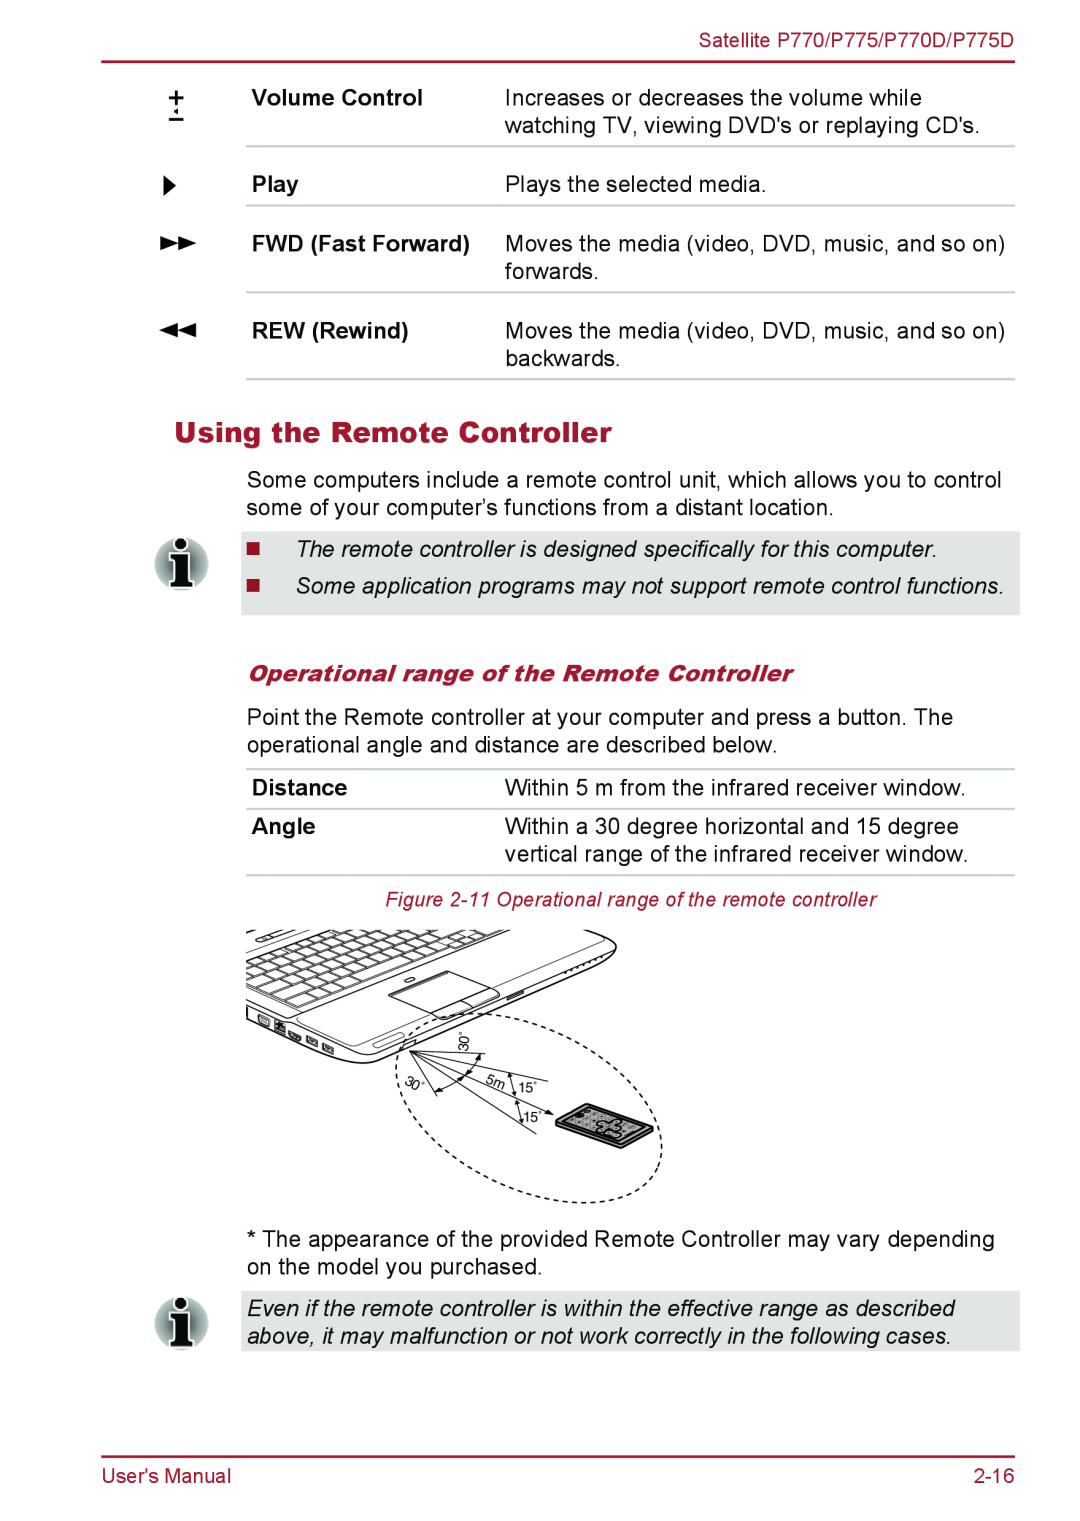 Toshiba P770 user manual Using the Remote Controller, Volume Control, Play, FWD Fast Forward, REW Rewind, Distance, Angle 